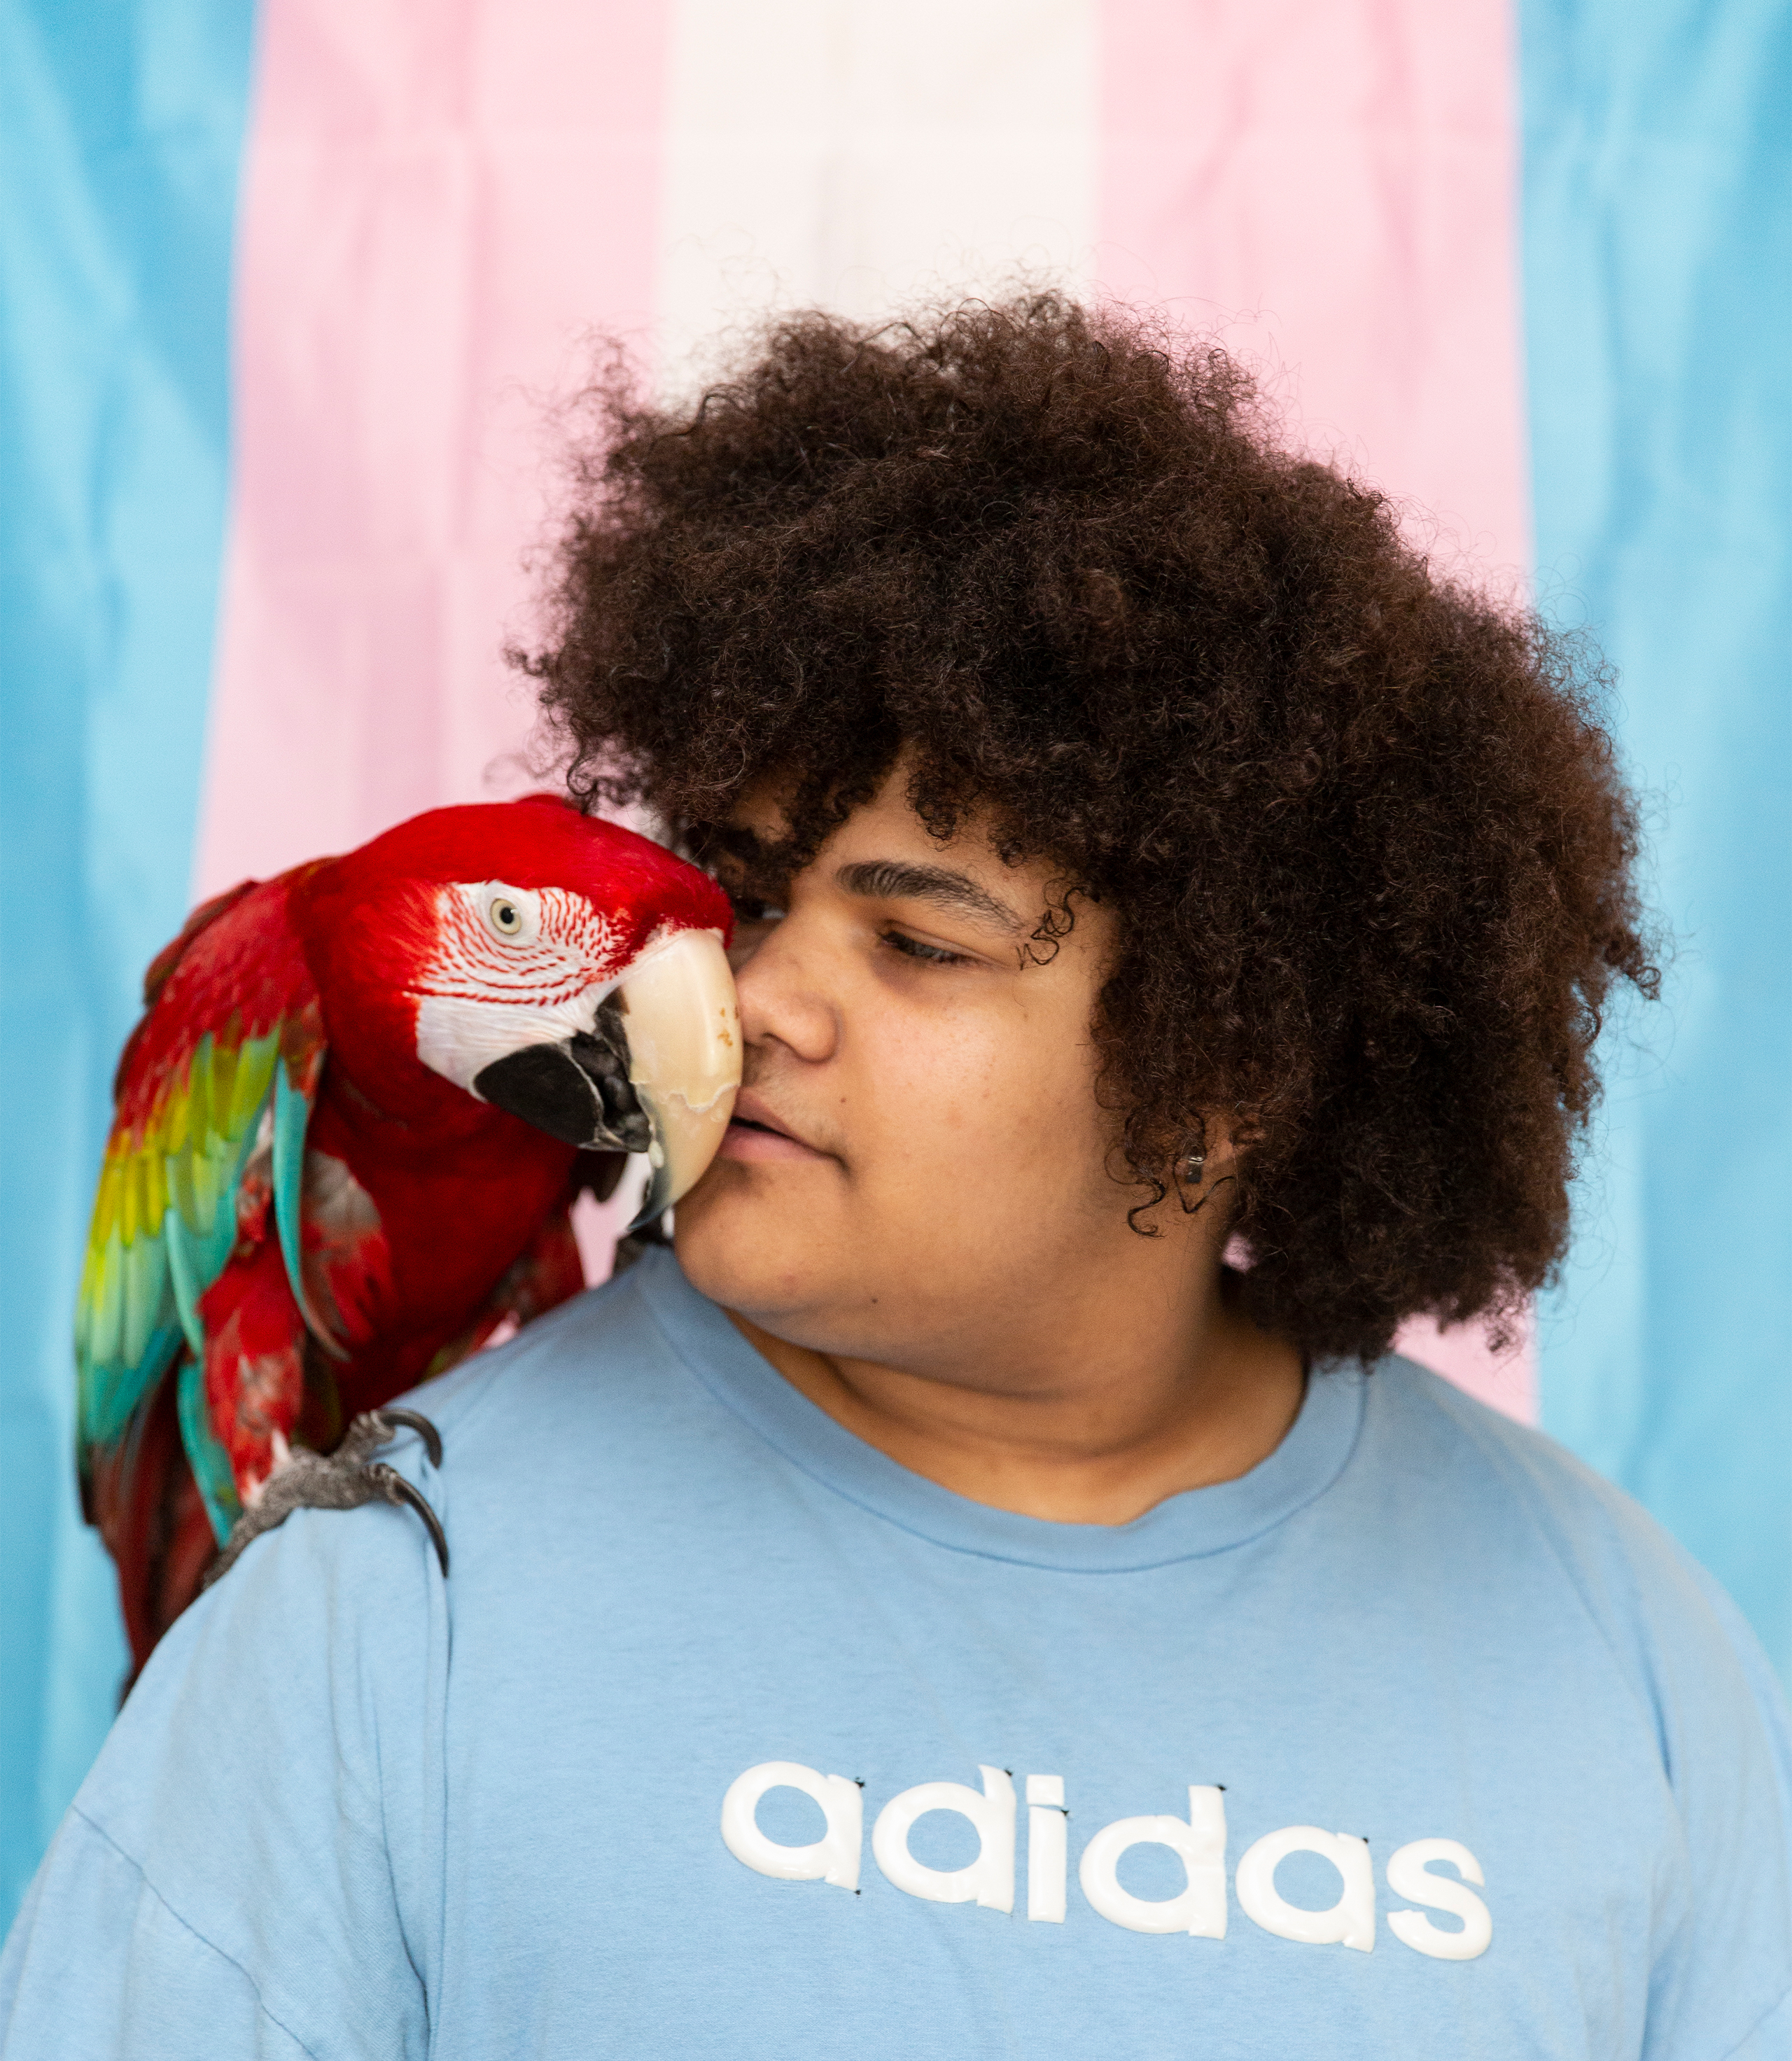 A photo shows Cameron Wright standing with his parrot, Mango, resting on his shoulder. A transgender pride flag fills the background behind him.